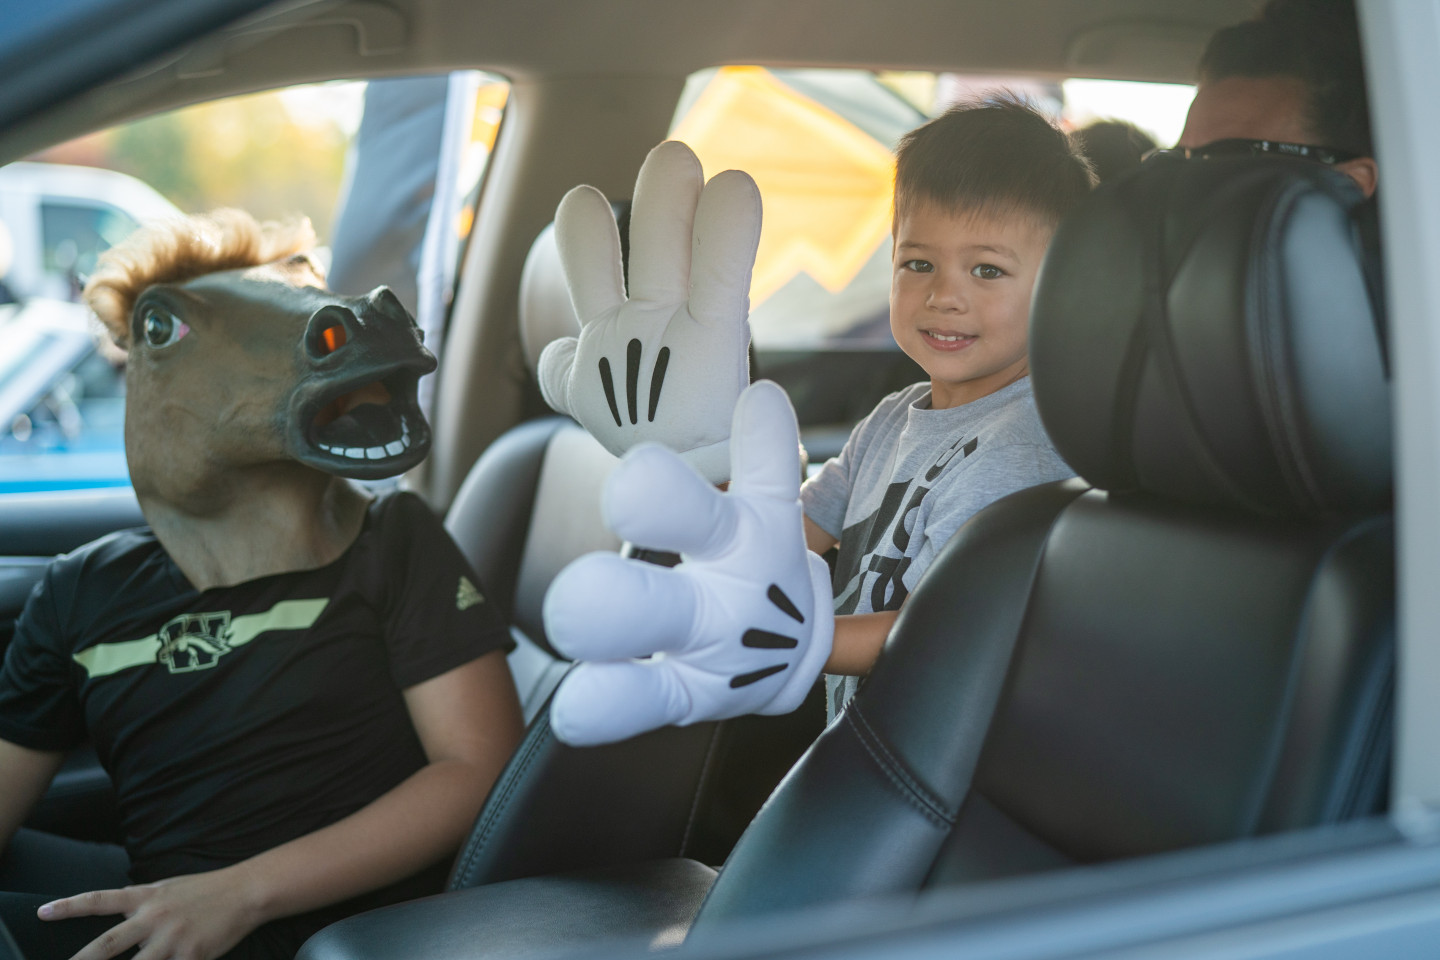 A young Bronco fan wearing large Mickey Mouse gloves.